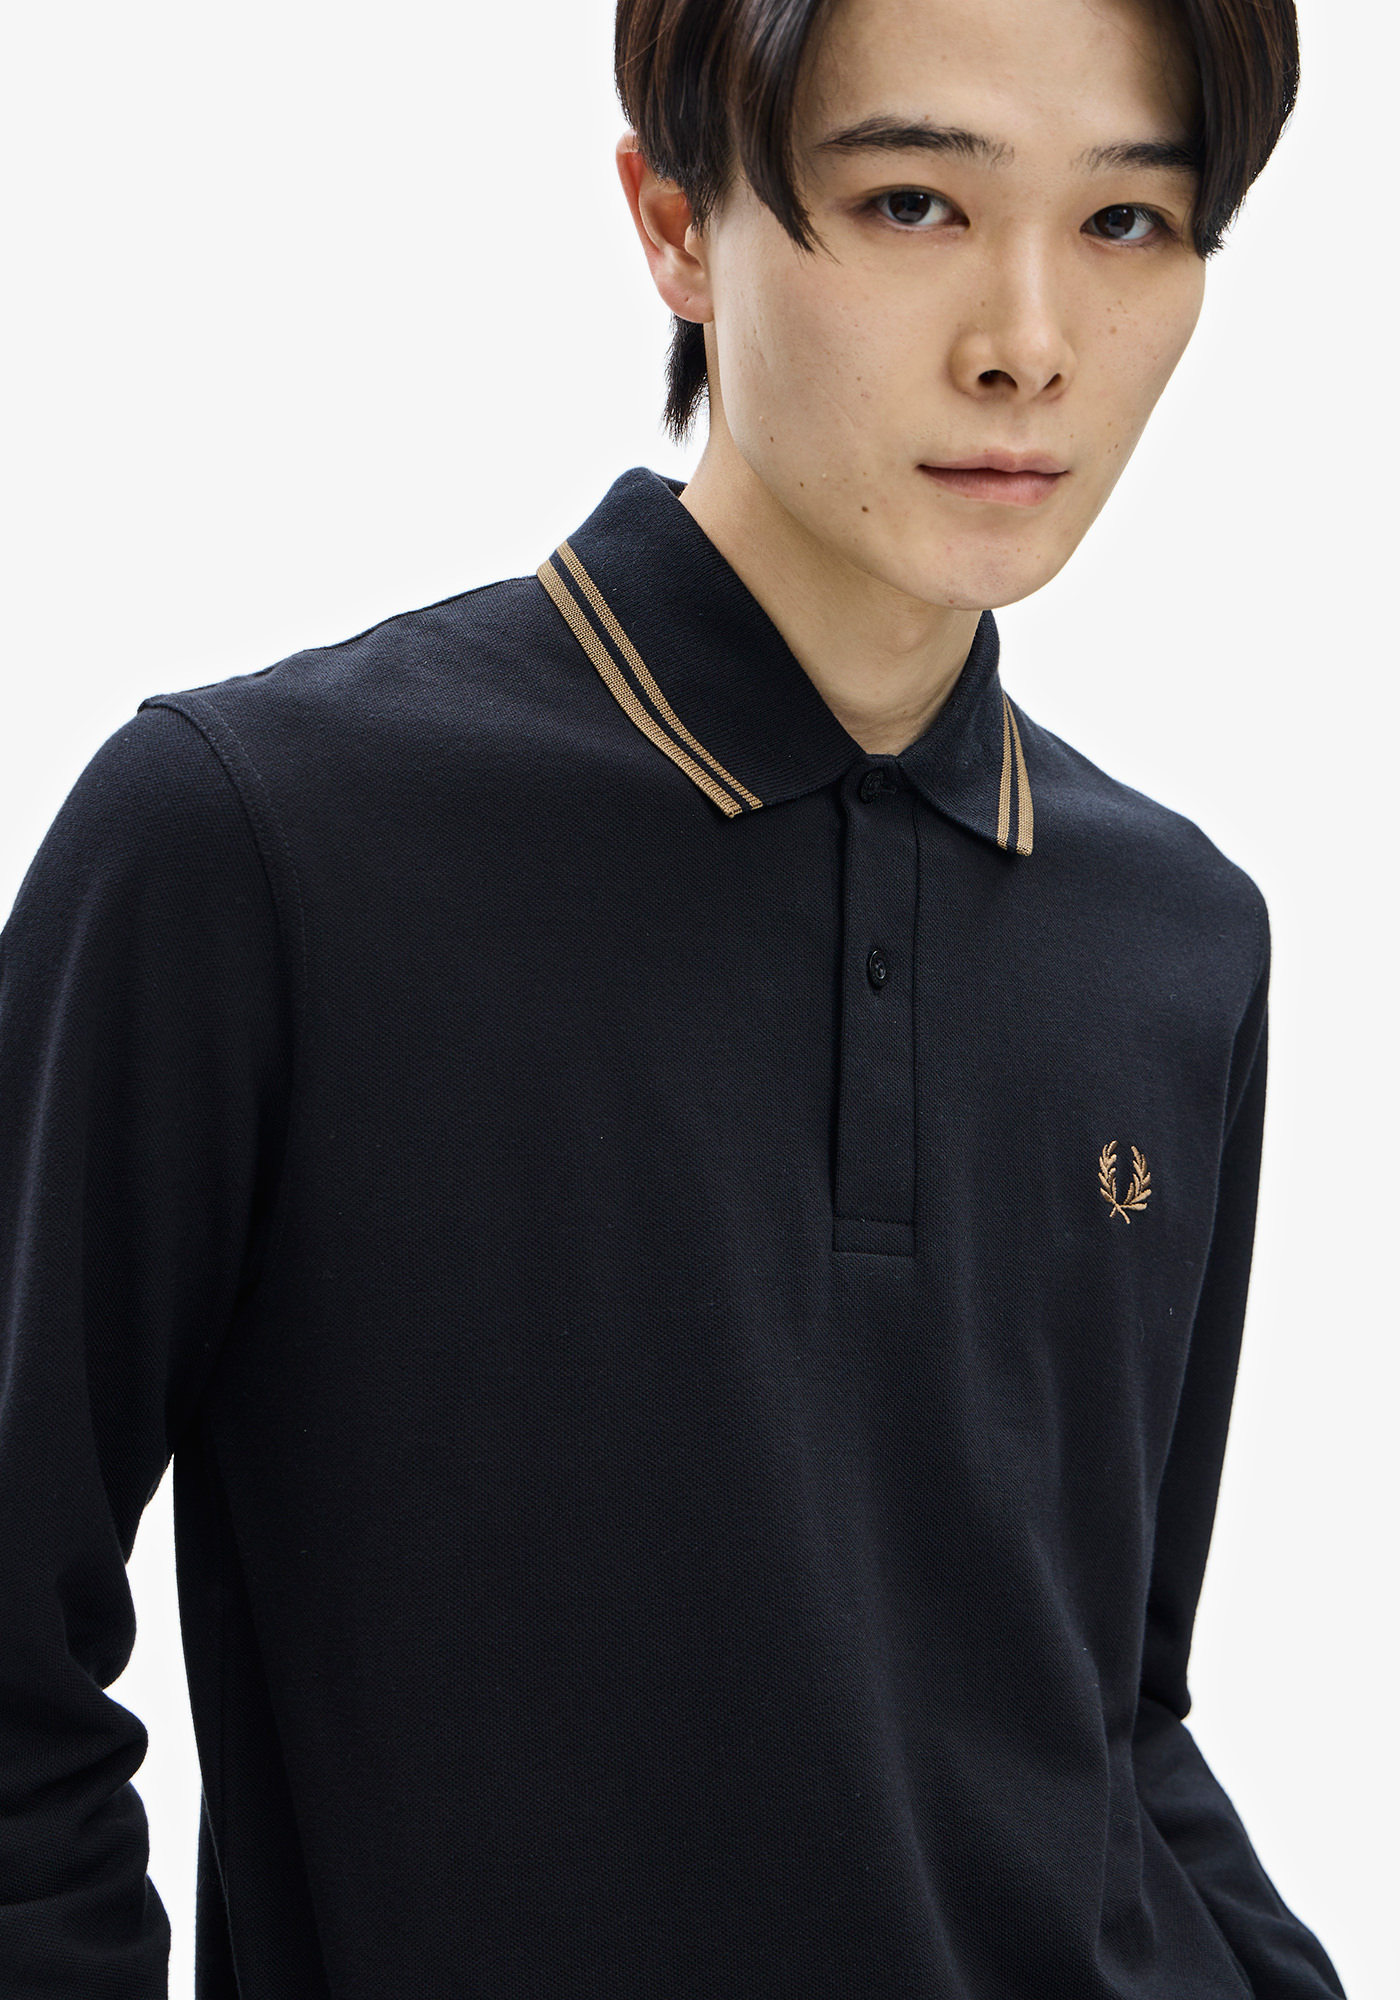 the Fred Perry Shirt -M12